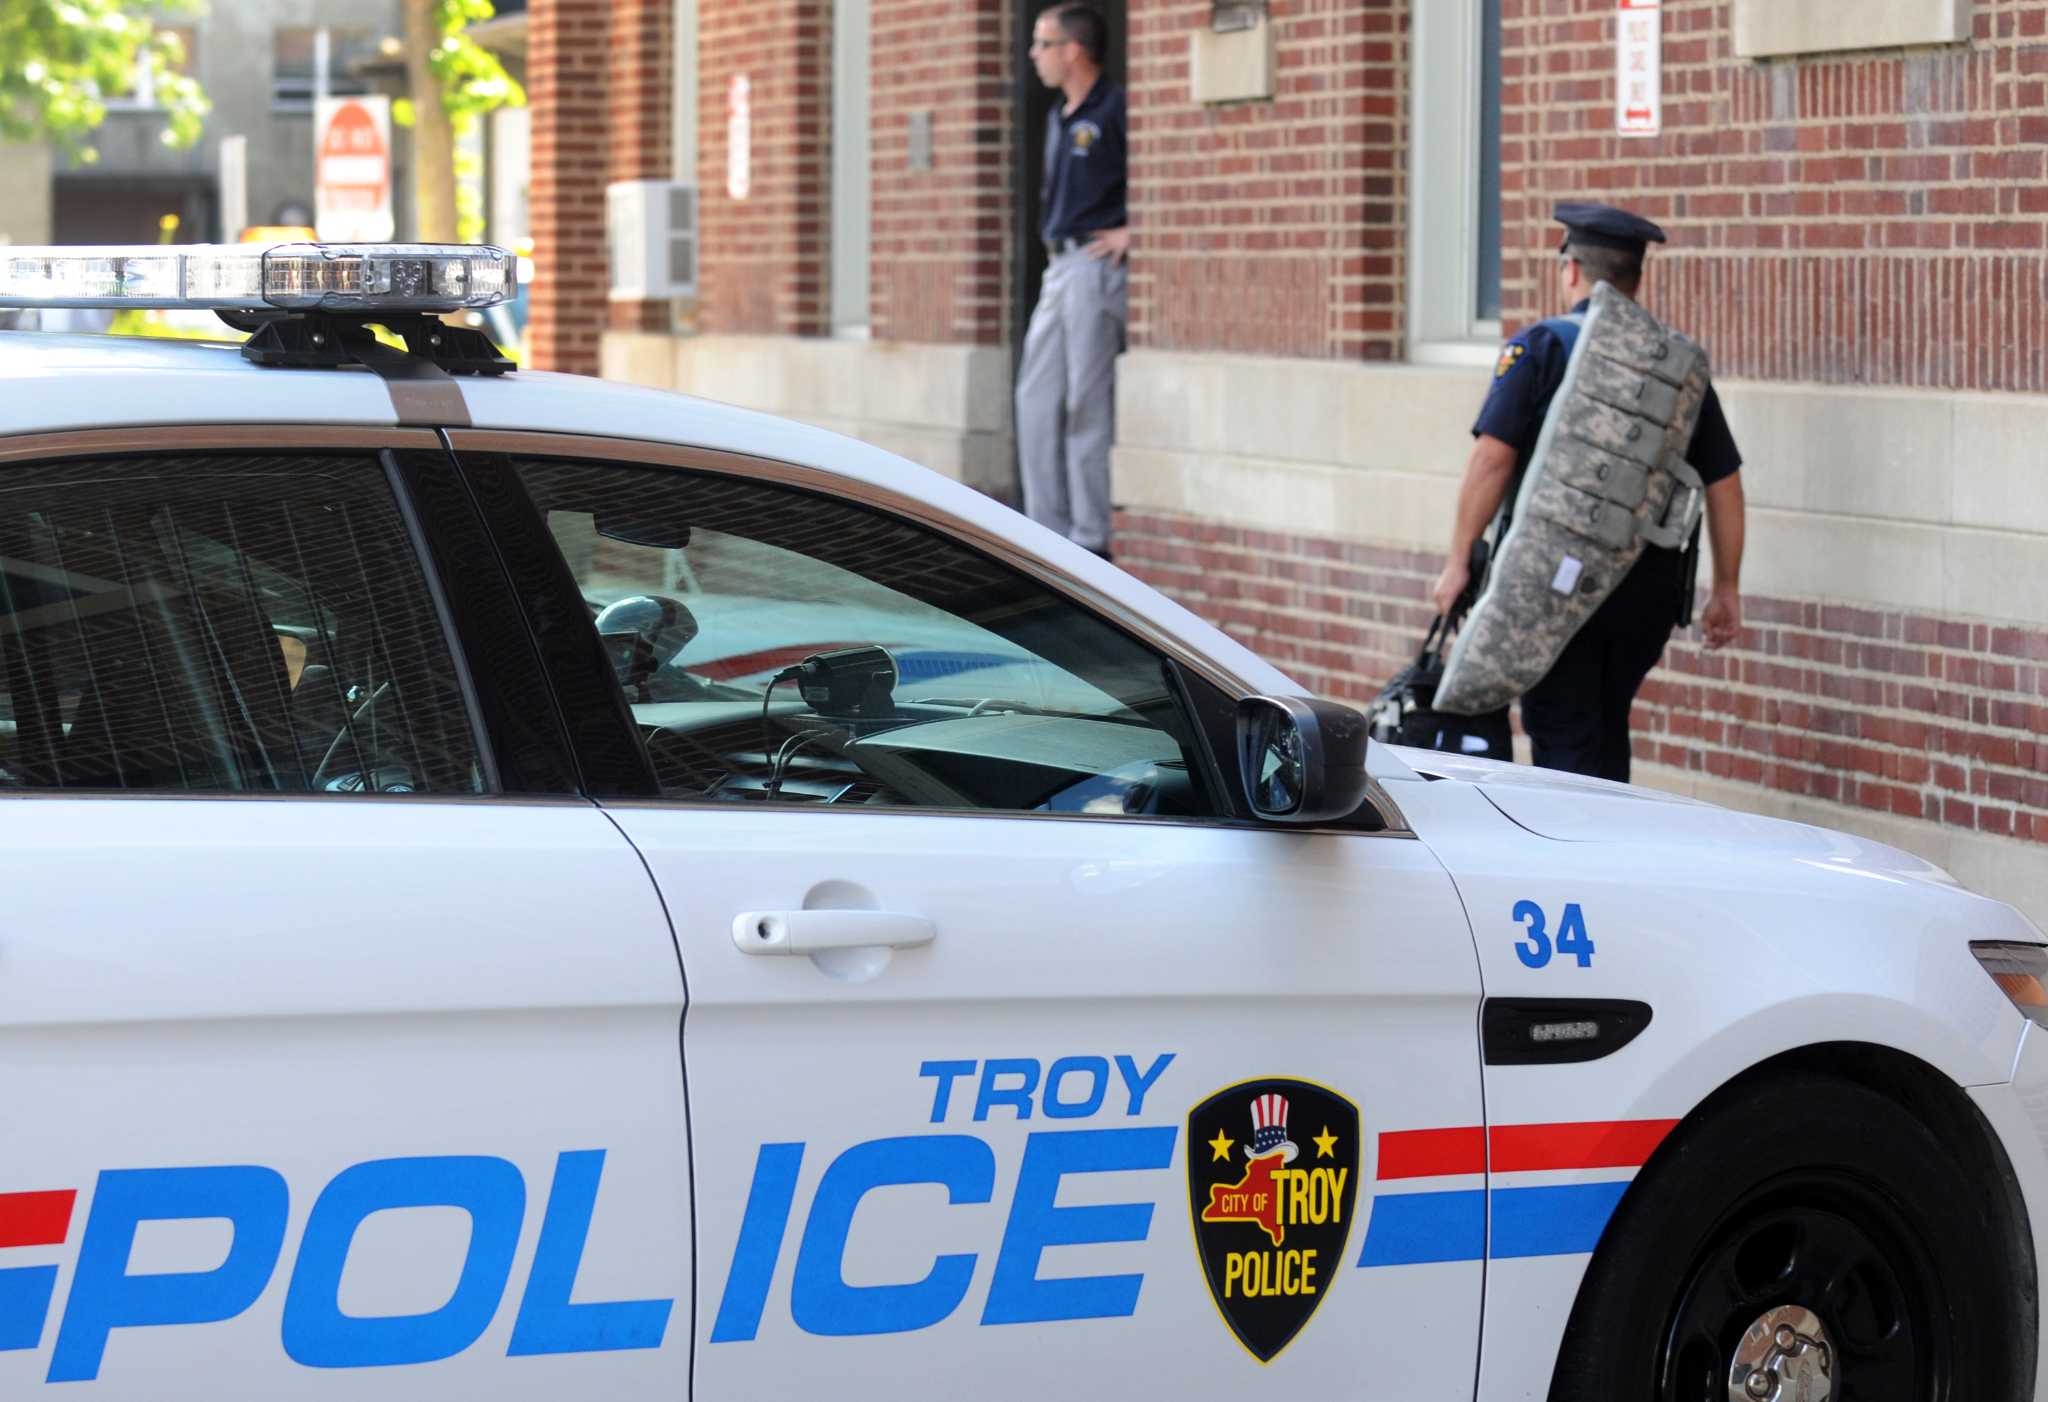 Leader of Troy drug unit accused of covering up warrantless search pic